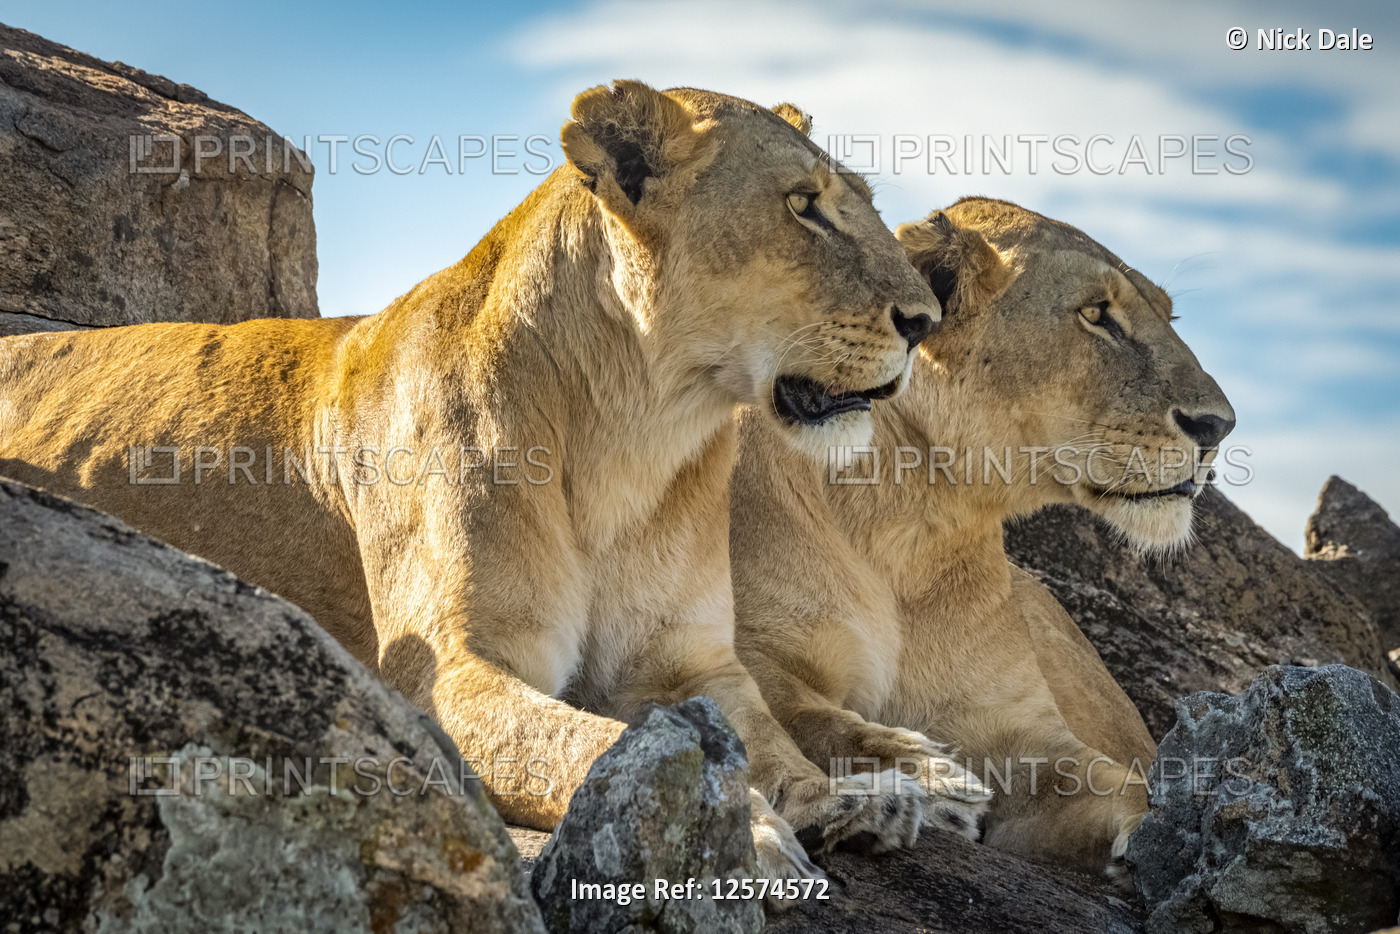 Lionesses (Panthera leo) lie mirroring each other on rock, Cottar's1920s Safari ...